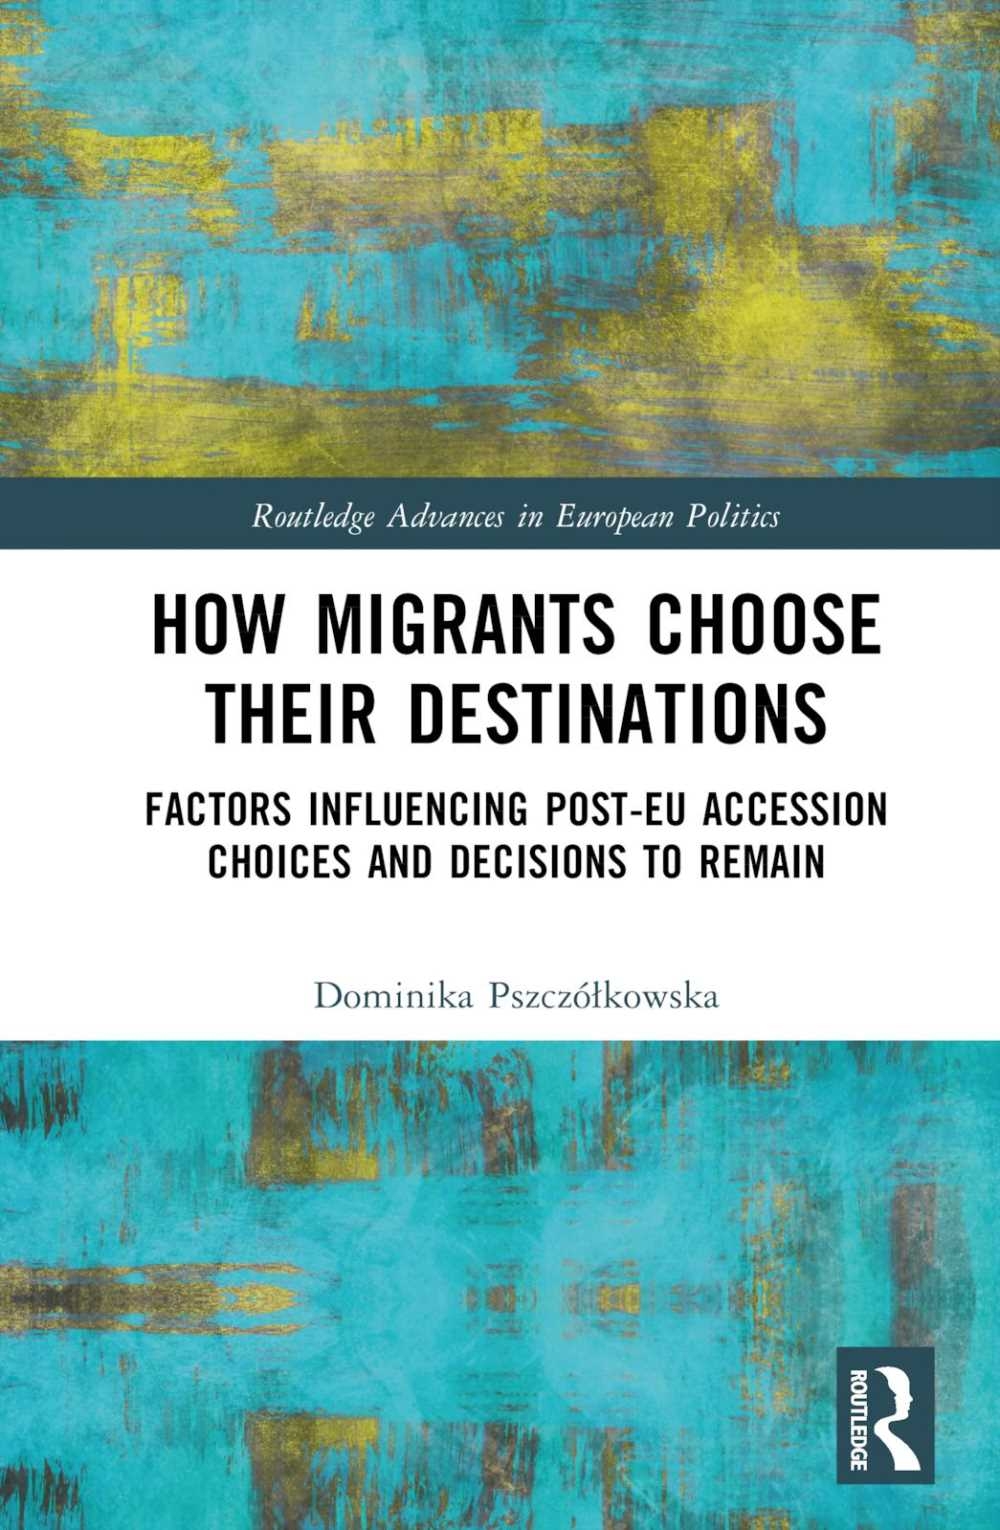 How Migrants Choose Their Destinations: Factors Influencing Post-Eu Accession Choices and Decisions to Remain